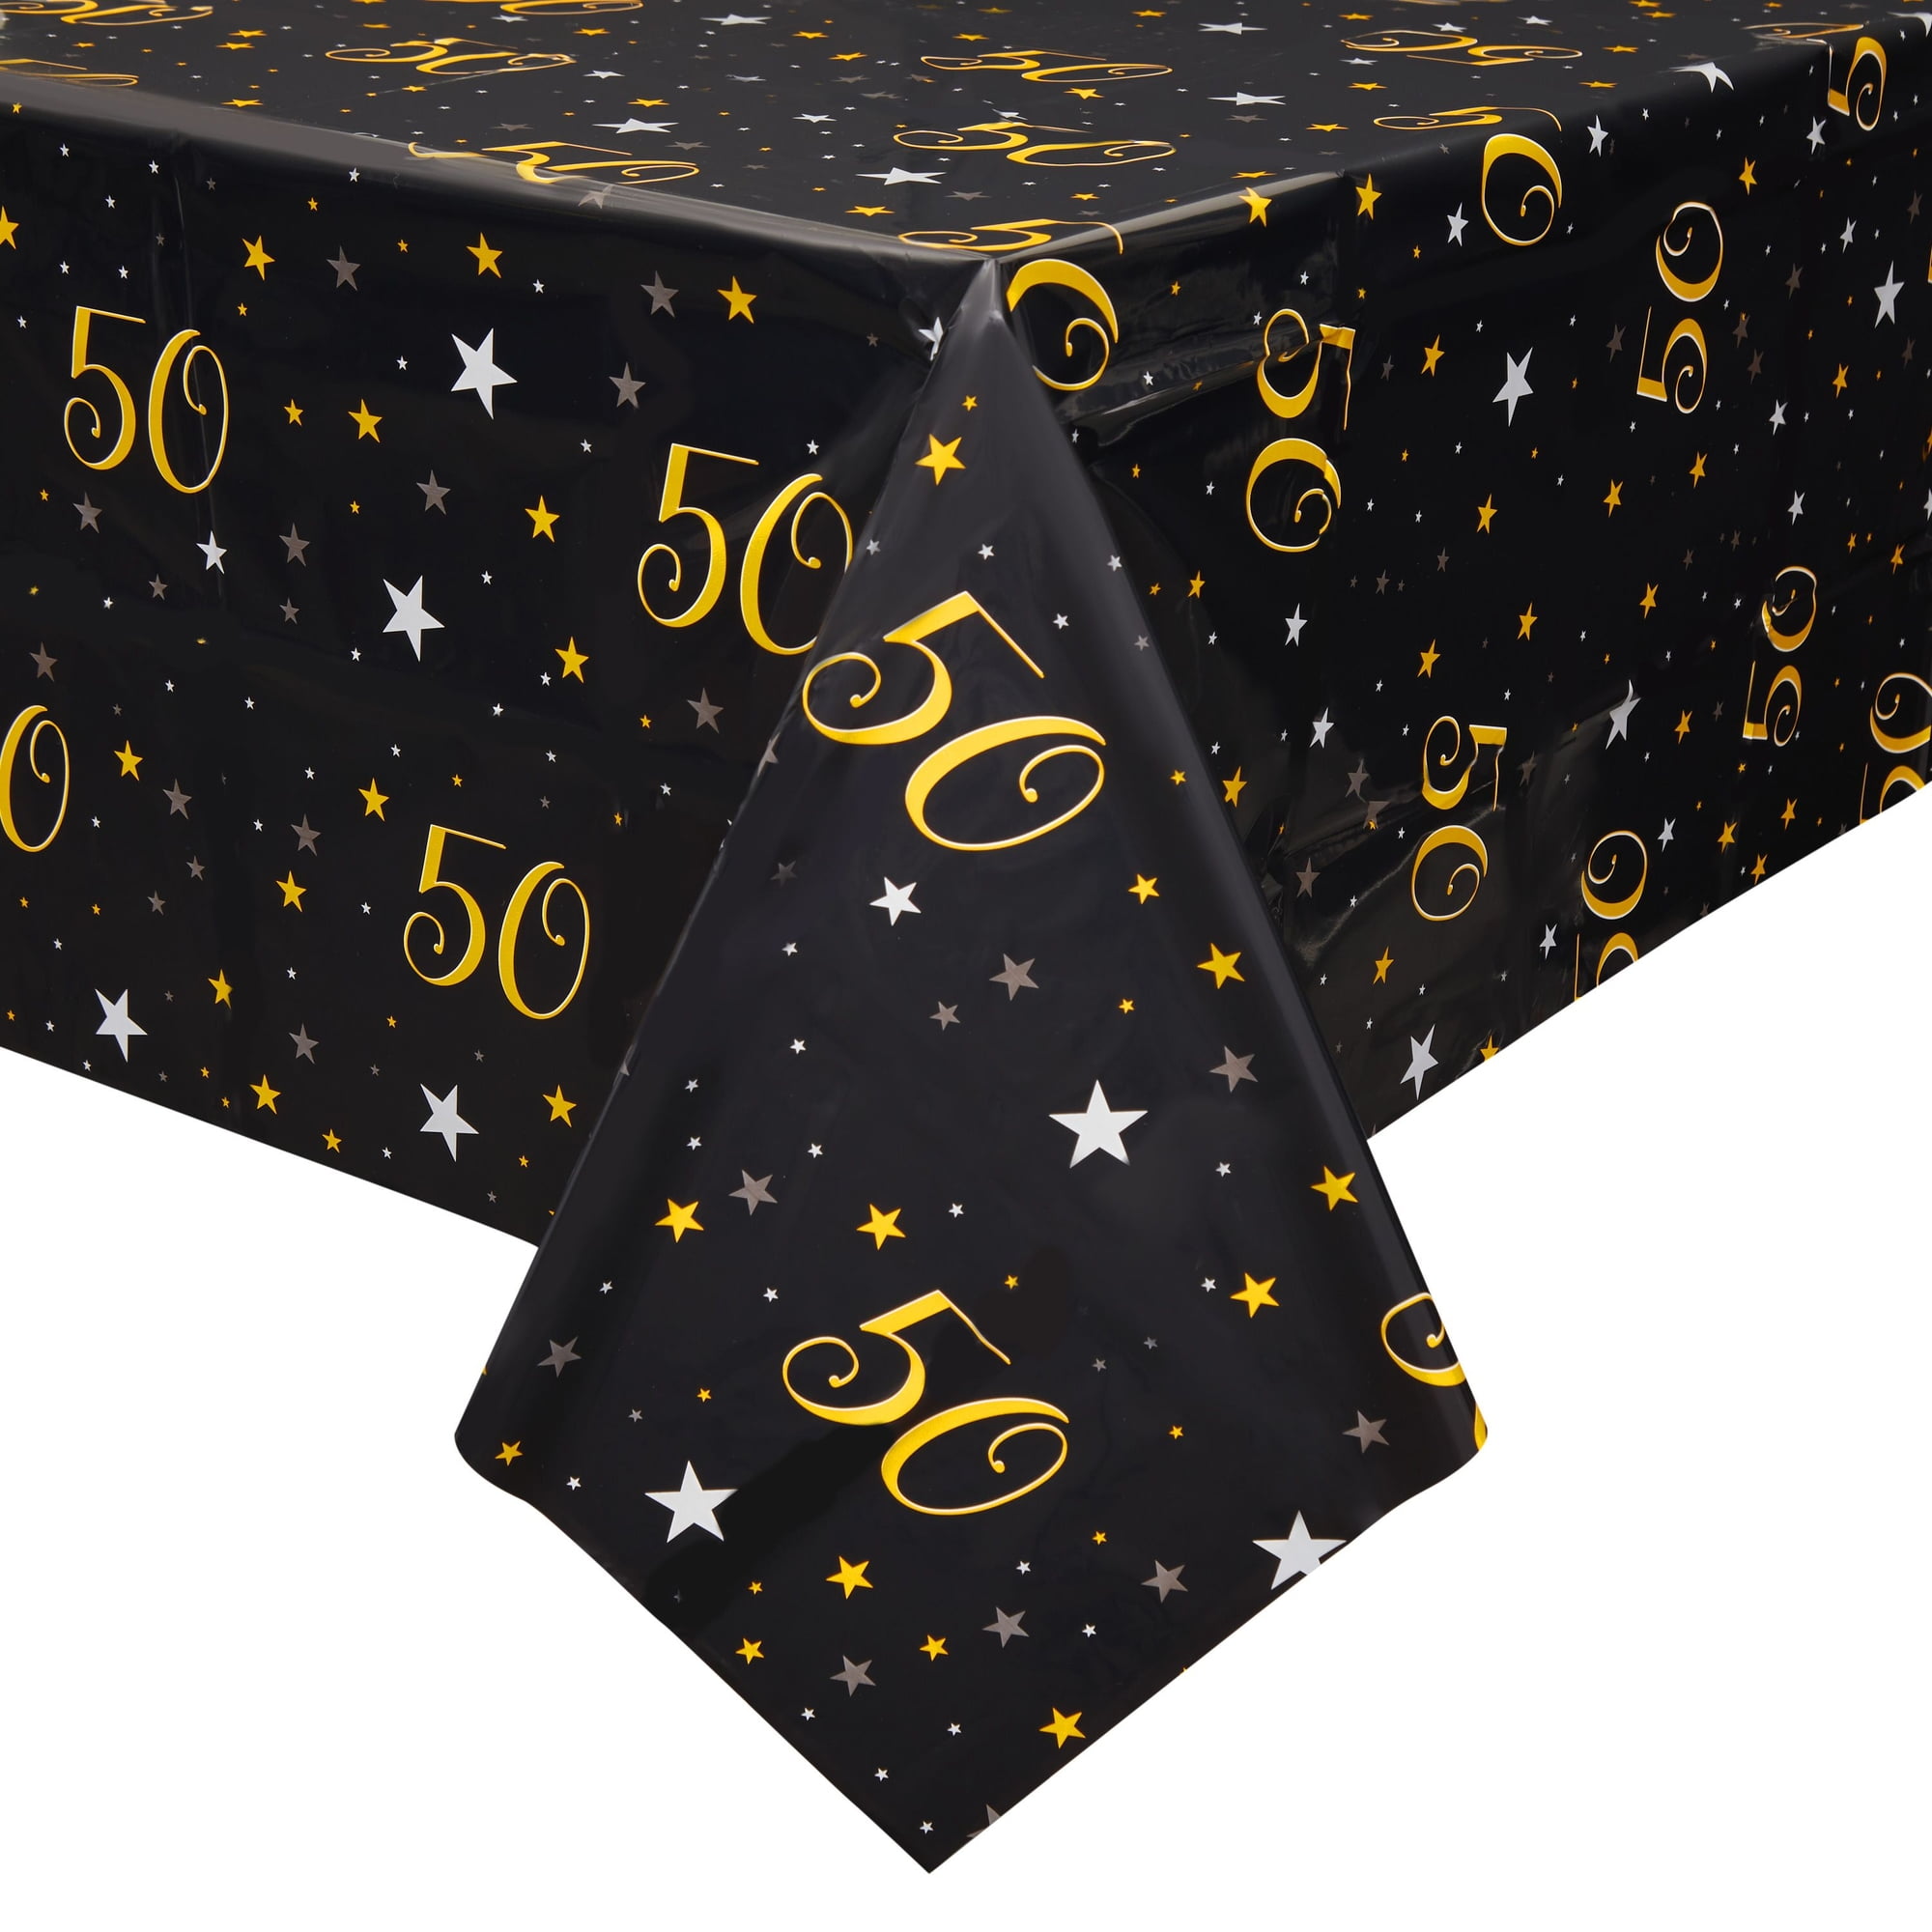 Hegbolke 50th Birthday Decorations for Women and Men - 81 Pcs Plates  Napkins 50th Tablecloth Forks Set Black and Gold Party Decorations Serve 20